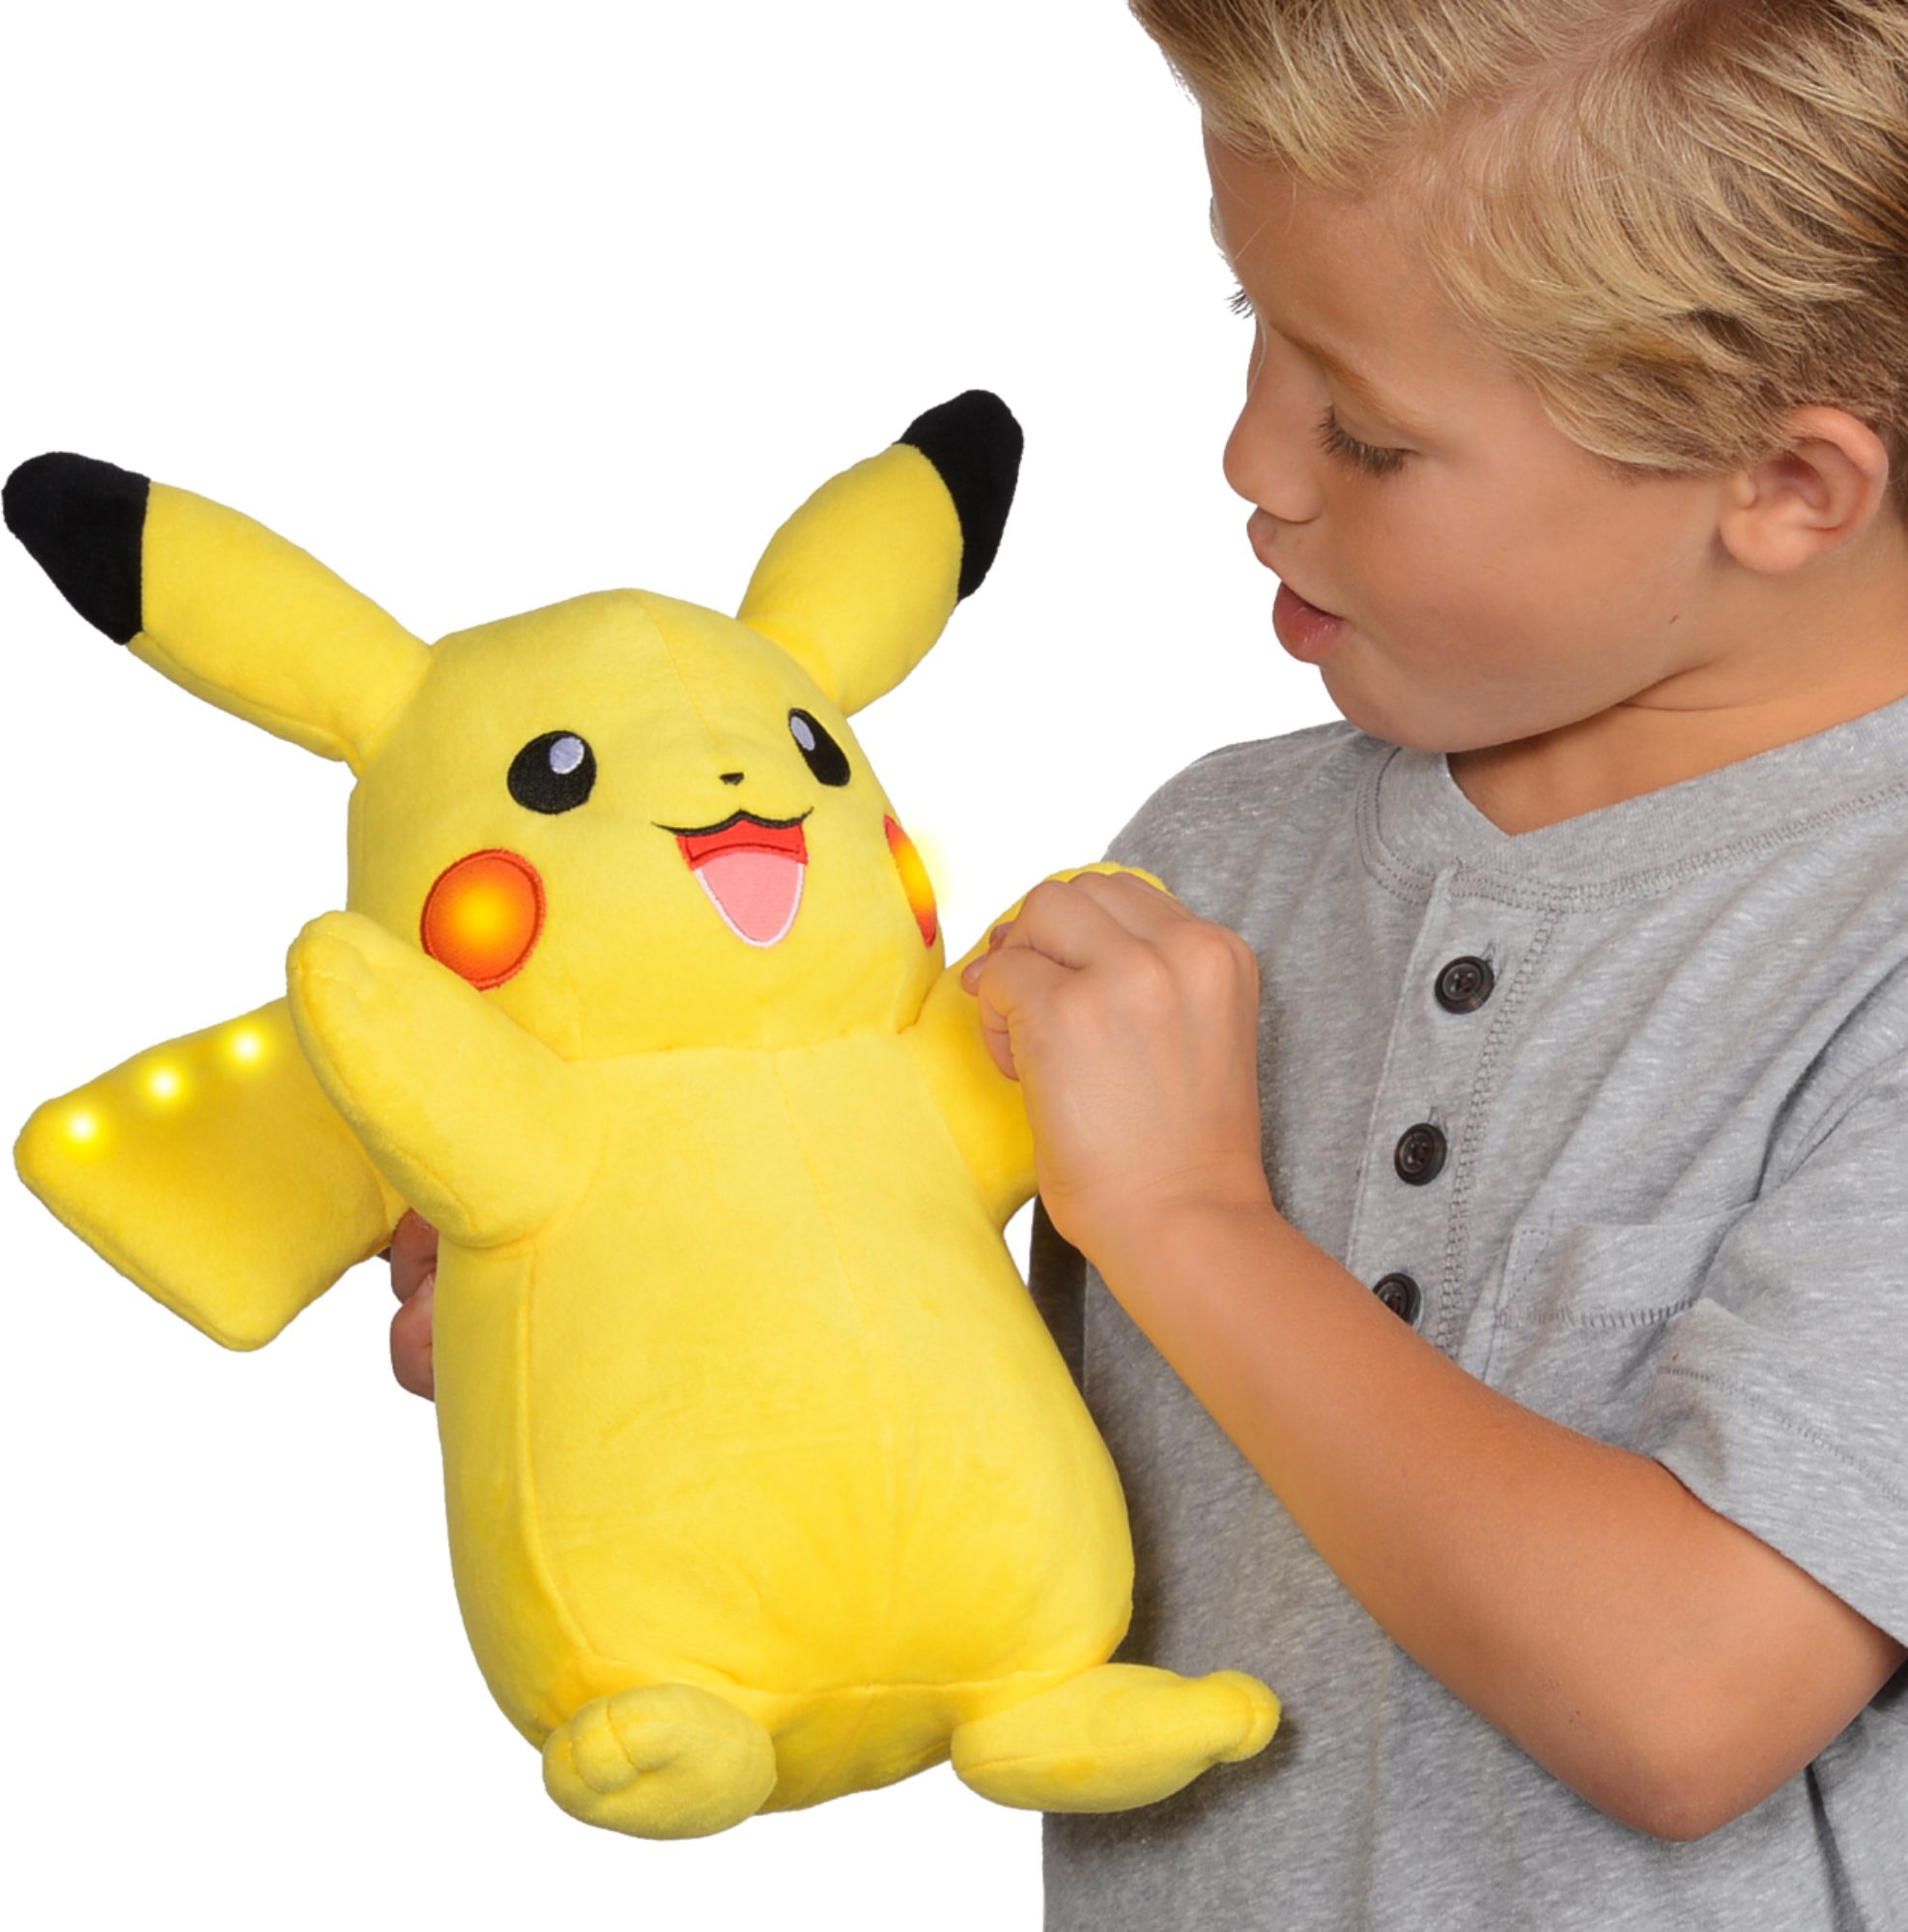 power action pikachu toy